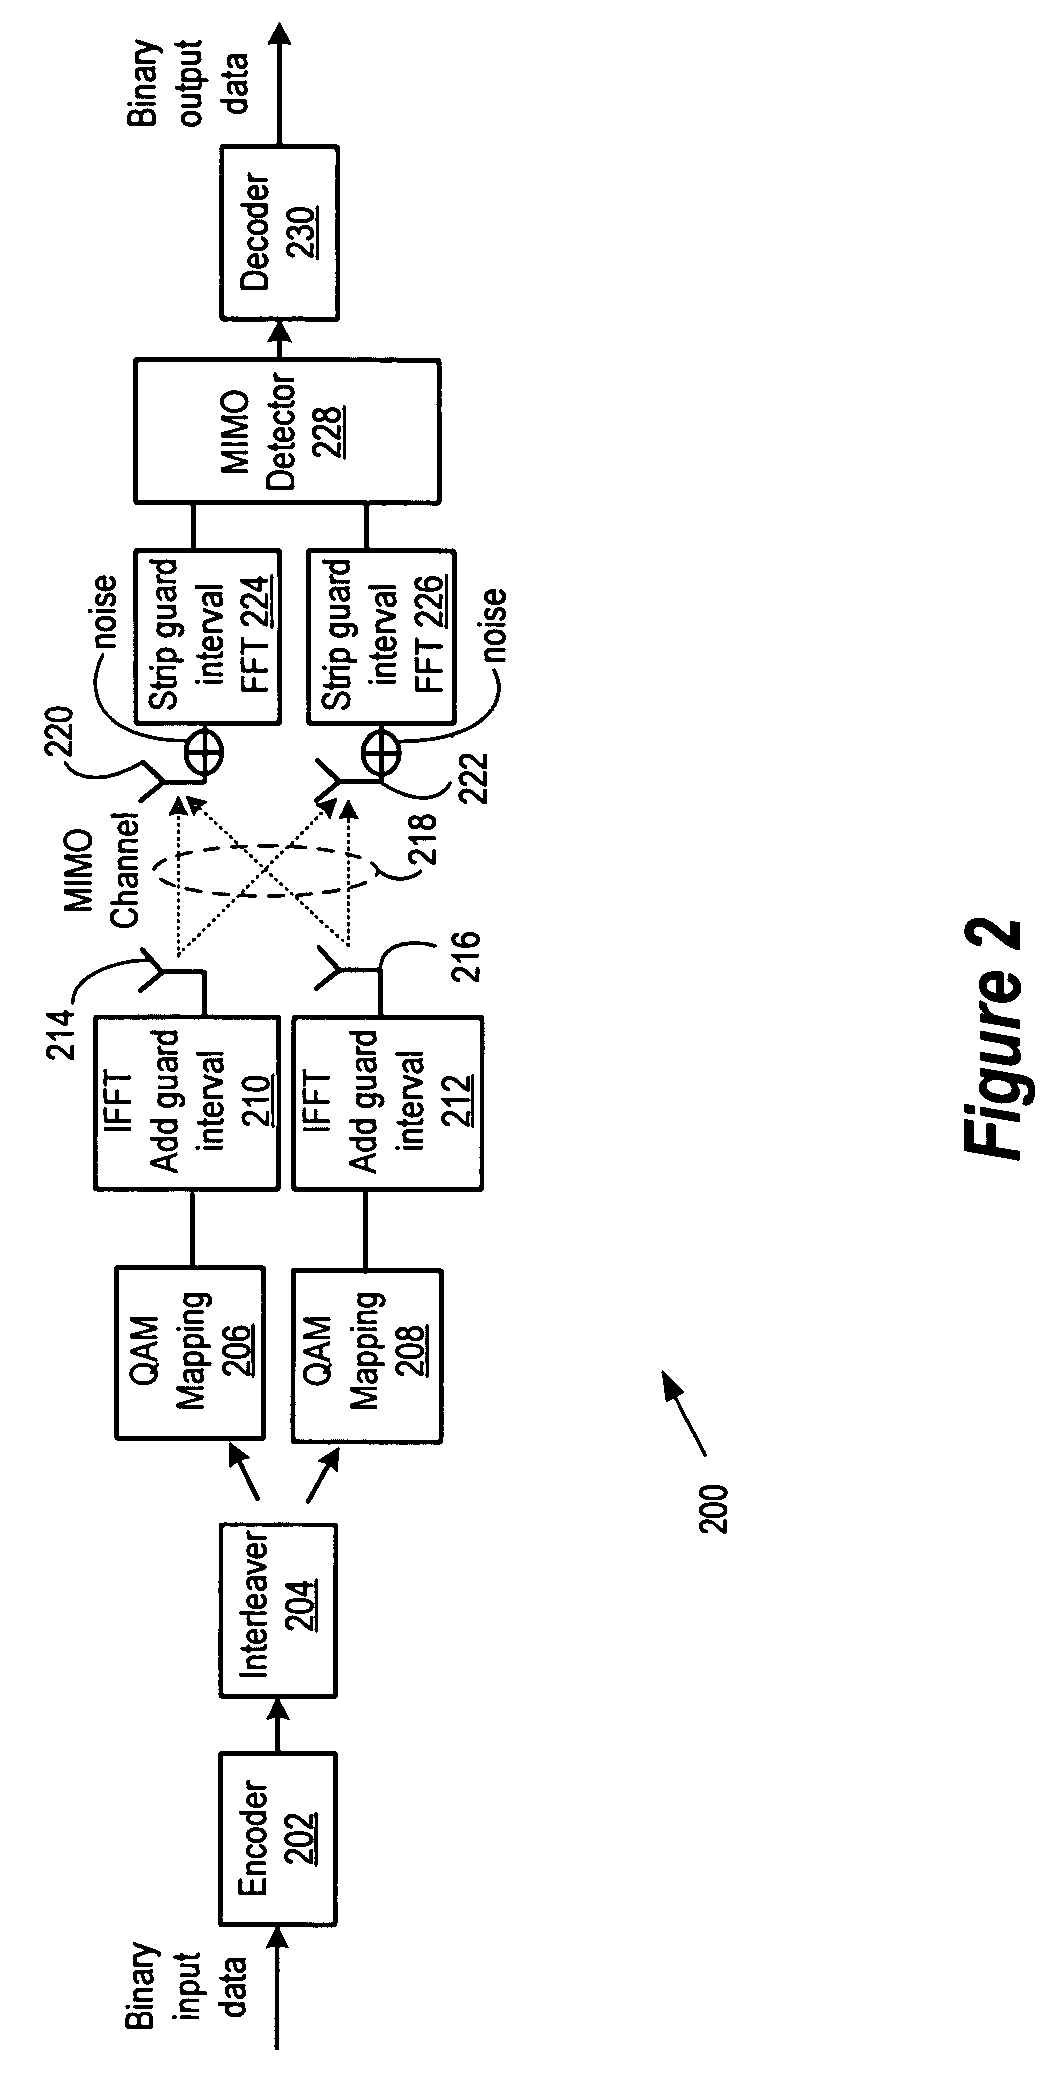 Reduced complexity detector for multiple-antenna systems